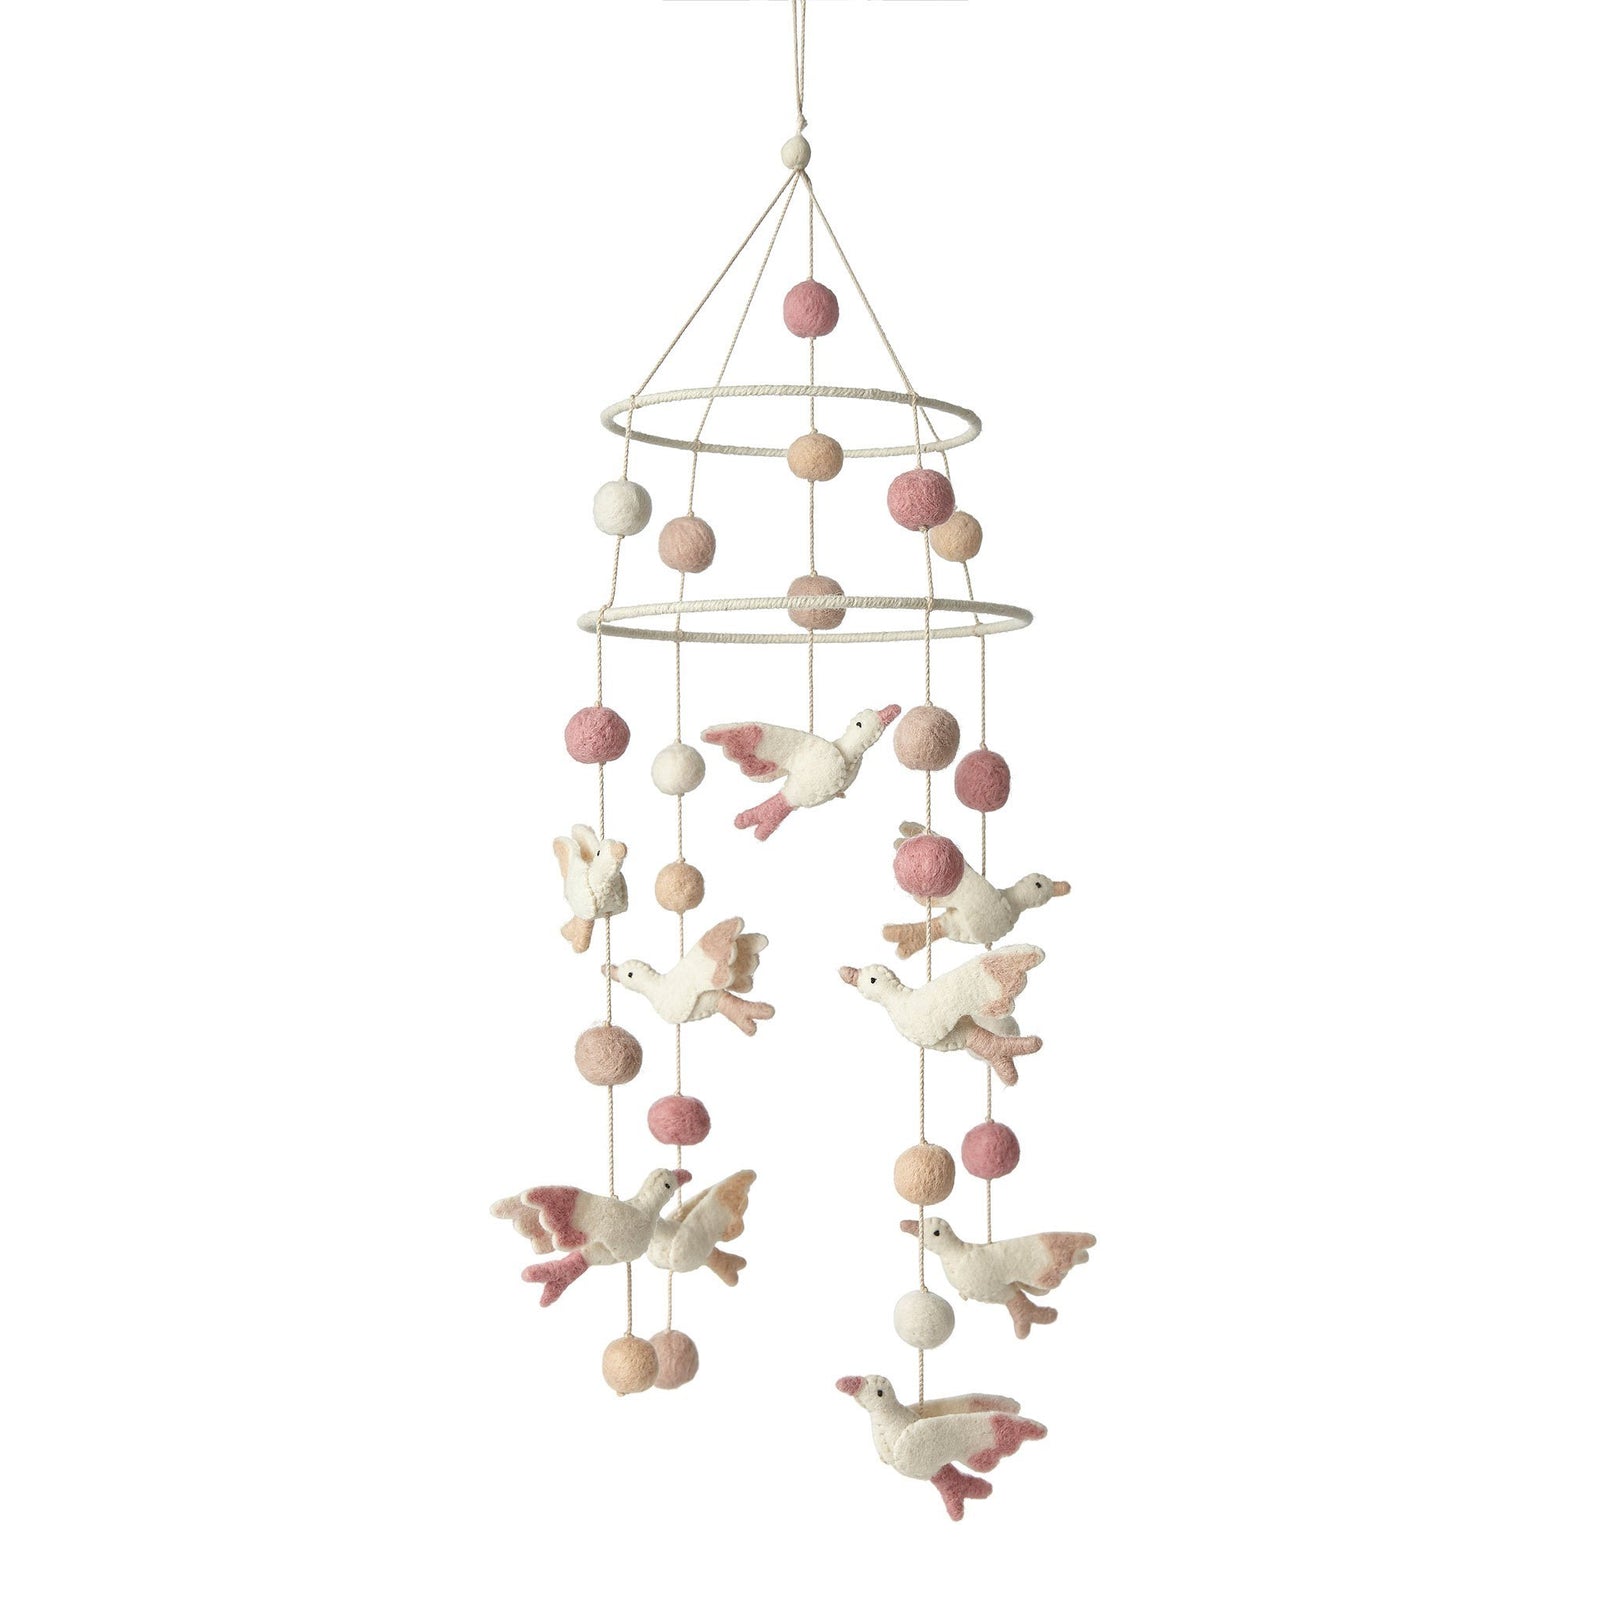 Pehr Two-Tiered Birds of a Feather Mobile. Handmade, 100% wool felt. Two-tiered with pink and white birds and dots.